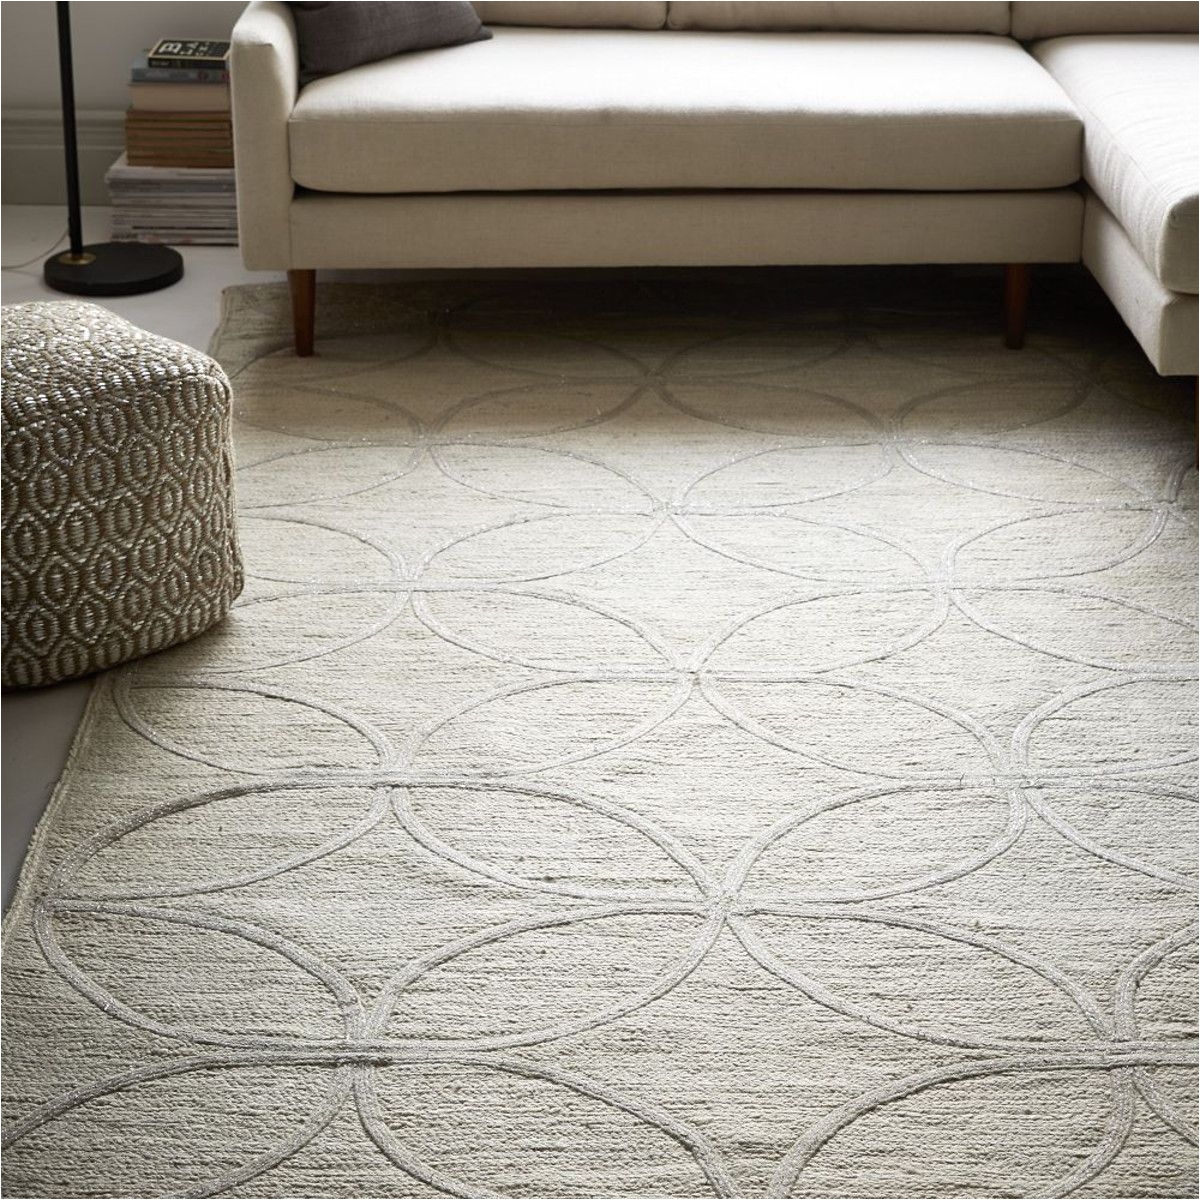 metallic leaf tile jute rug i ve pinned my favourite rugs west elm pottery barn have some goodies for bayliss ones i can get a discount